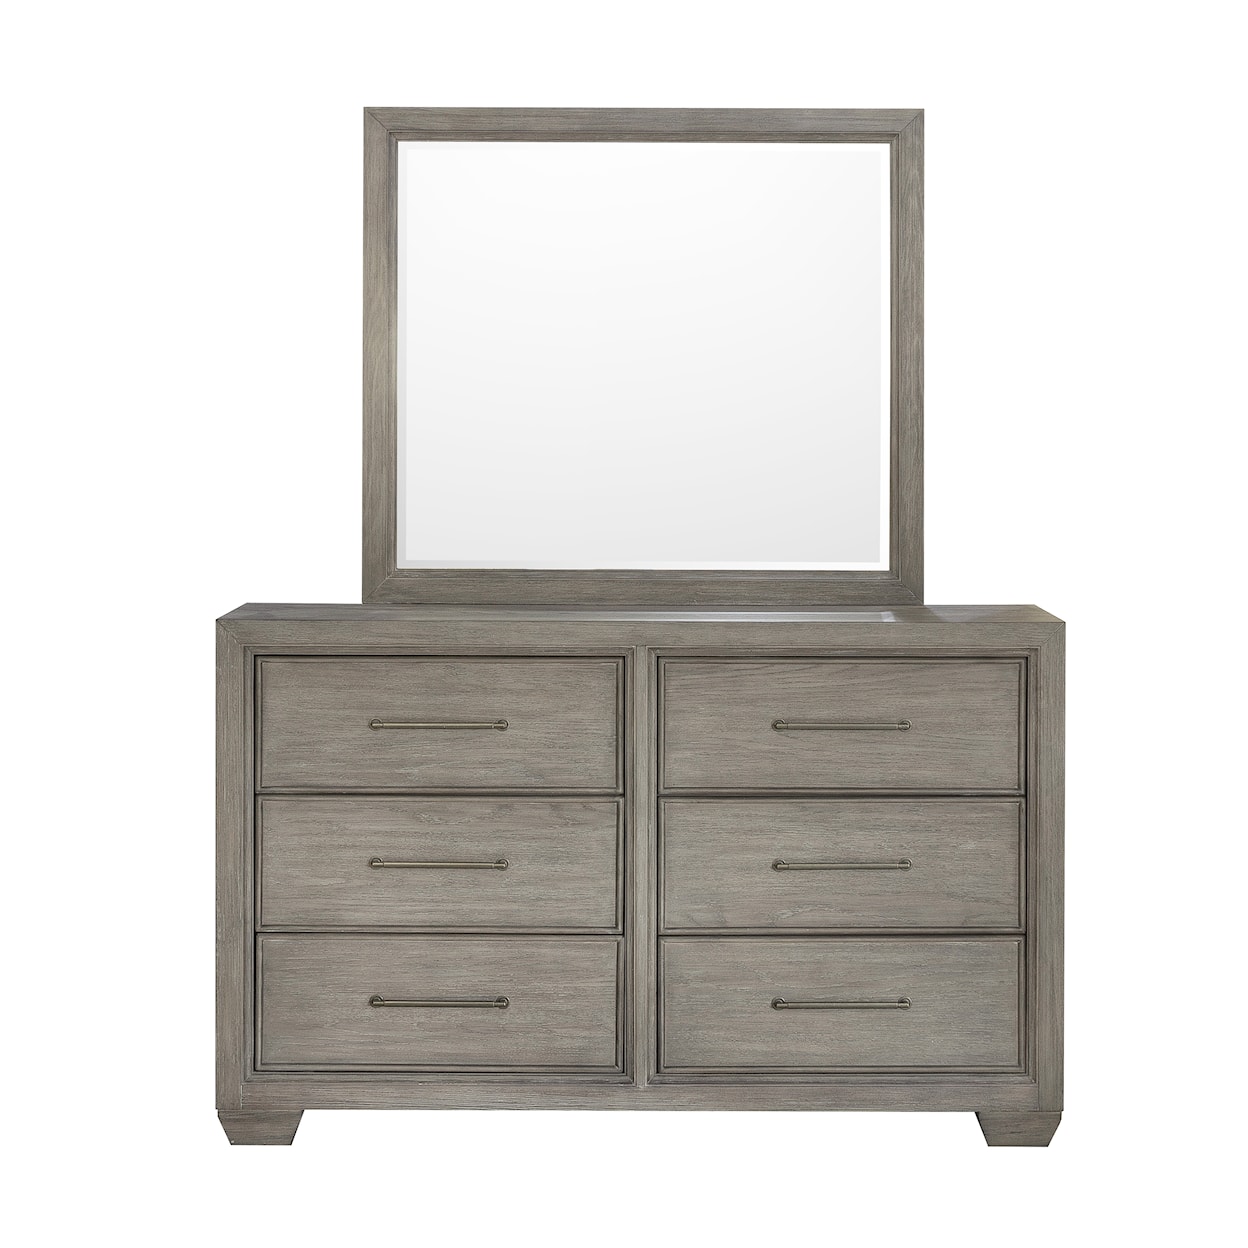 Samuel Lawrence Andover Dresser with Mirror